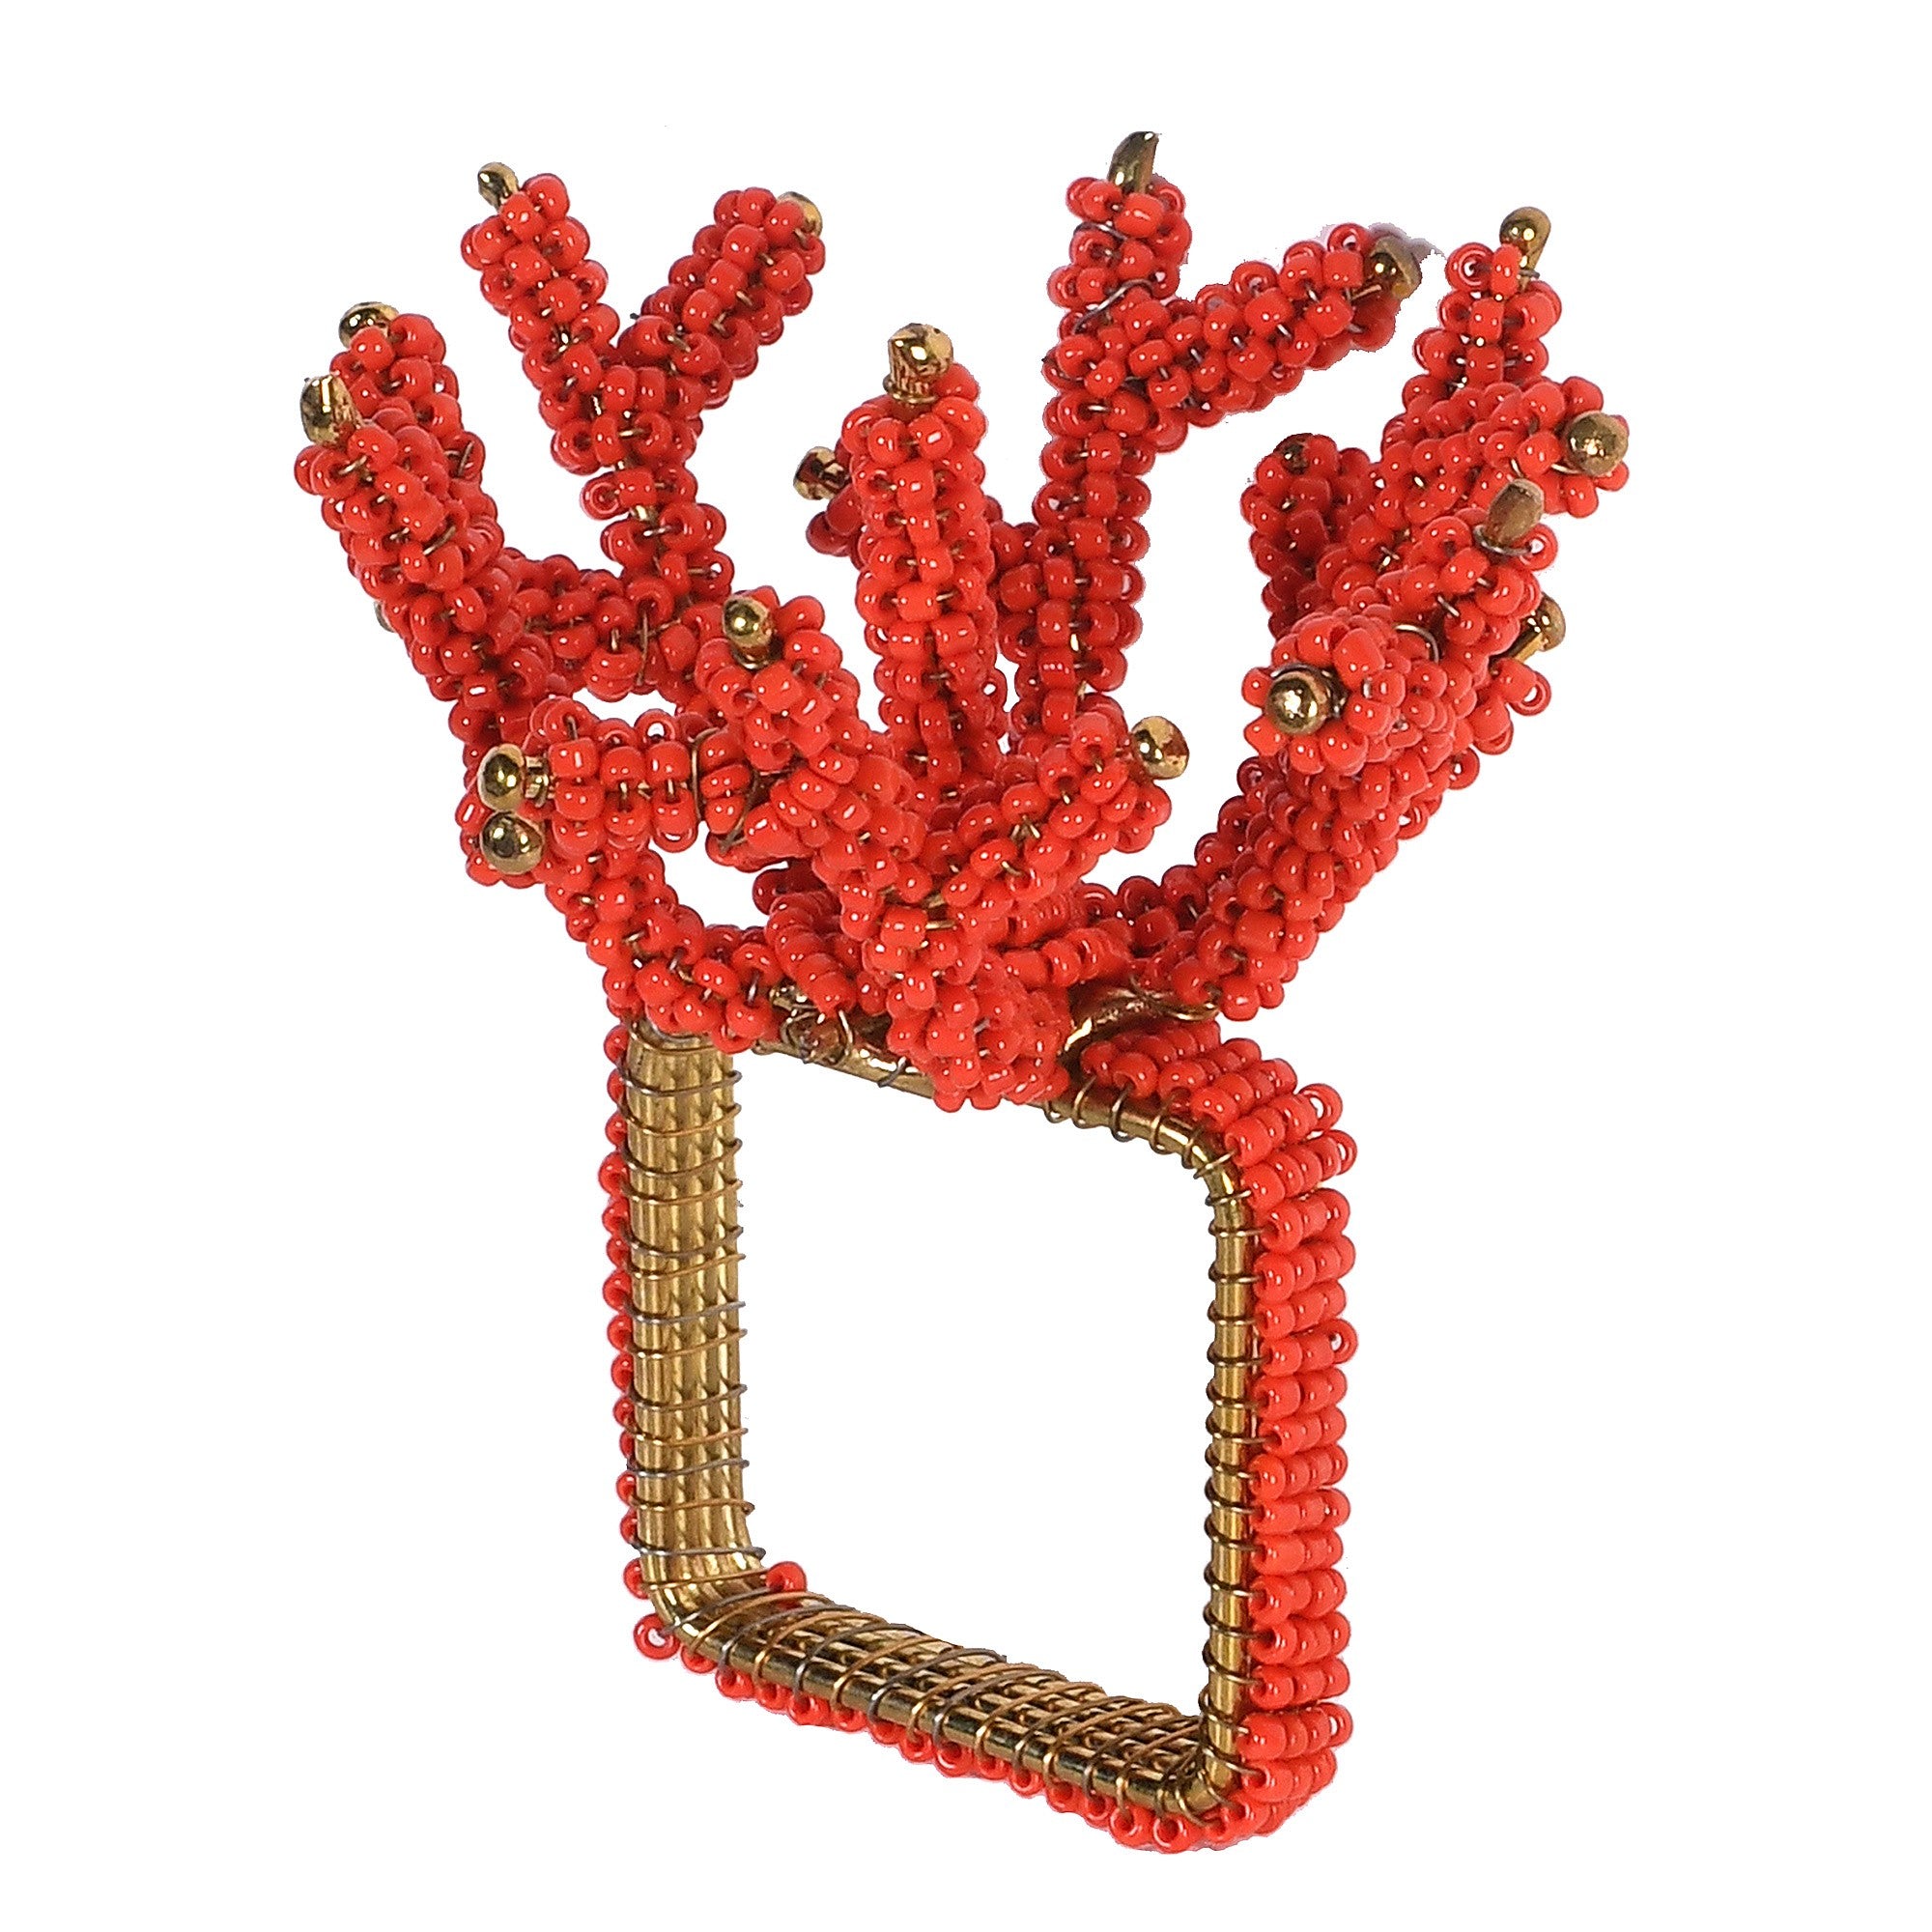 Beaded Red Coral Napkin Rings | Set of 4